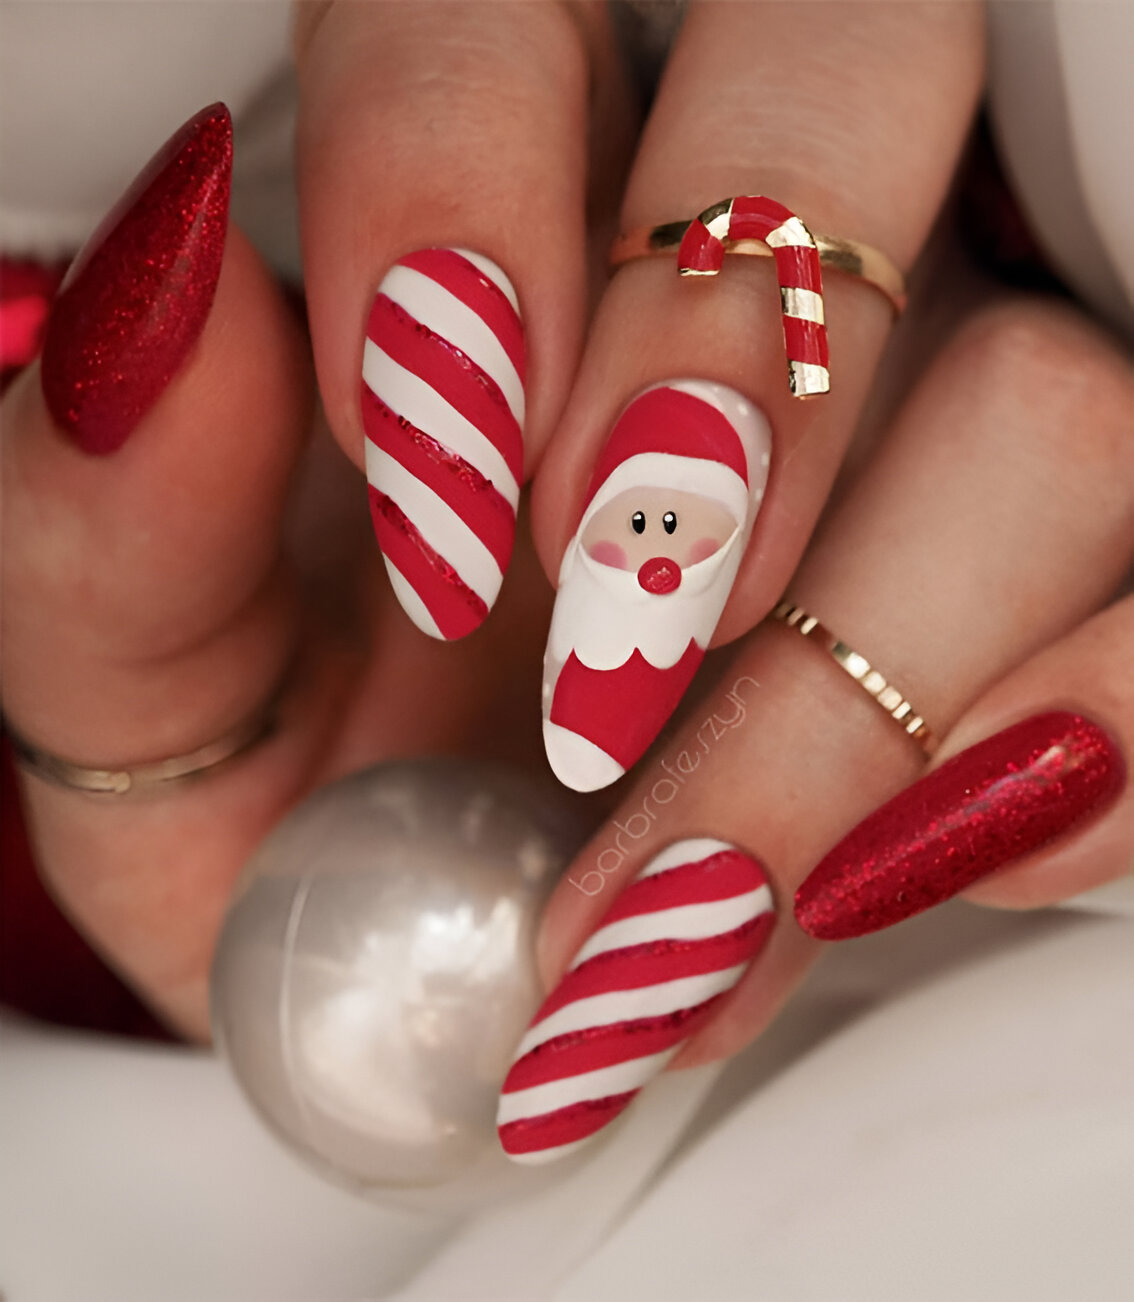 Festive Manicure Ideas With Peperminted Theme